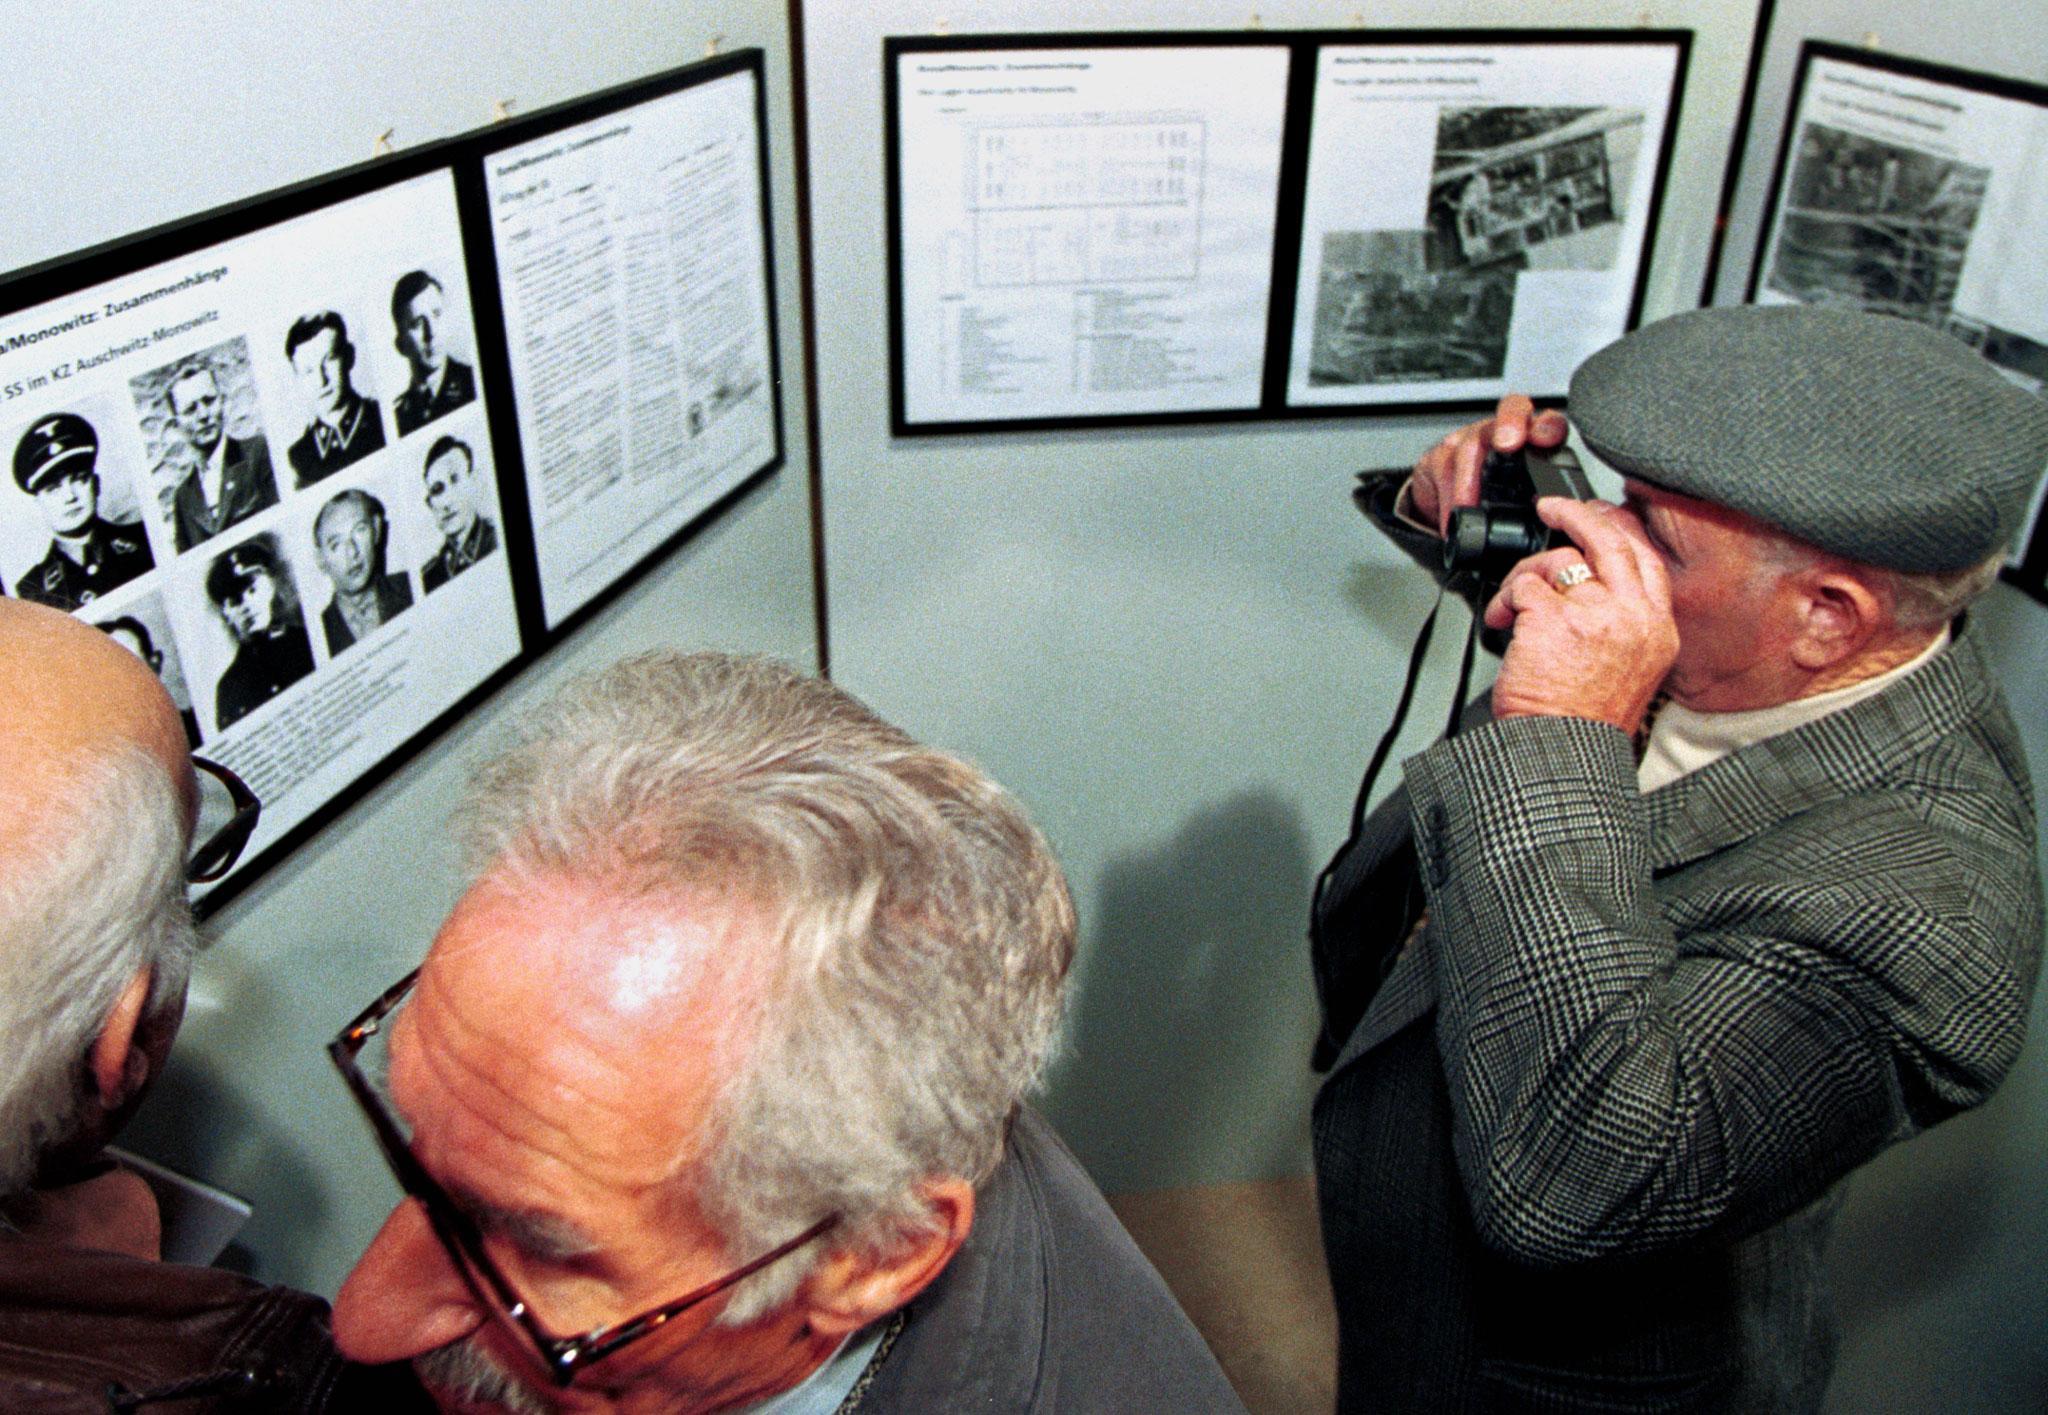 Herman Shine, right, a Holocaust survivor, snaps a picture of the SS guards who held him captive in Auschwitz, during an exhibition in Frankfurt